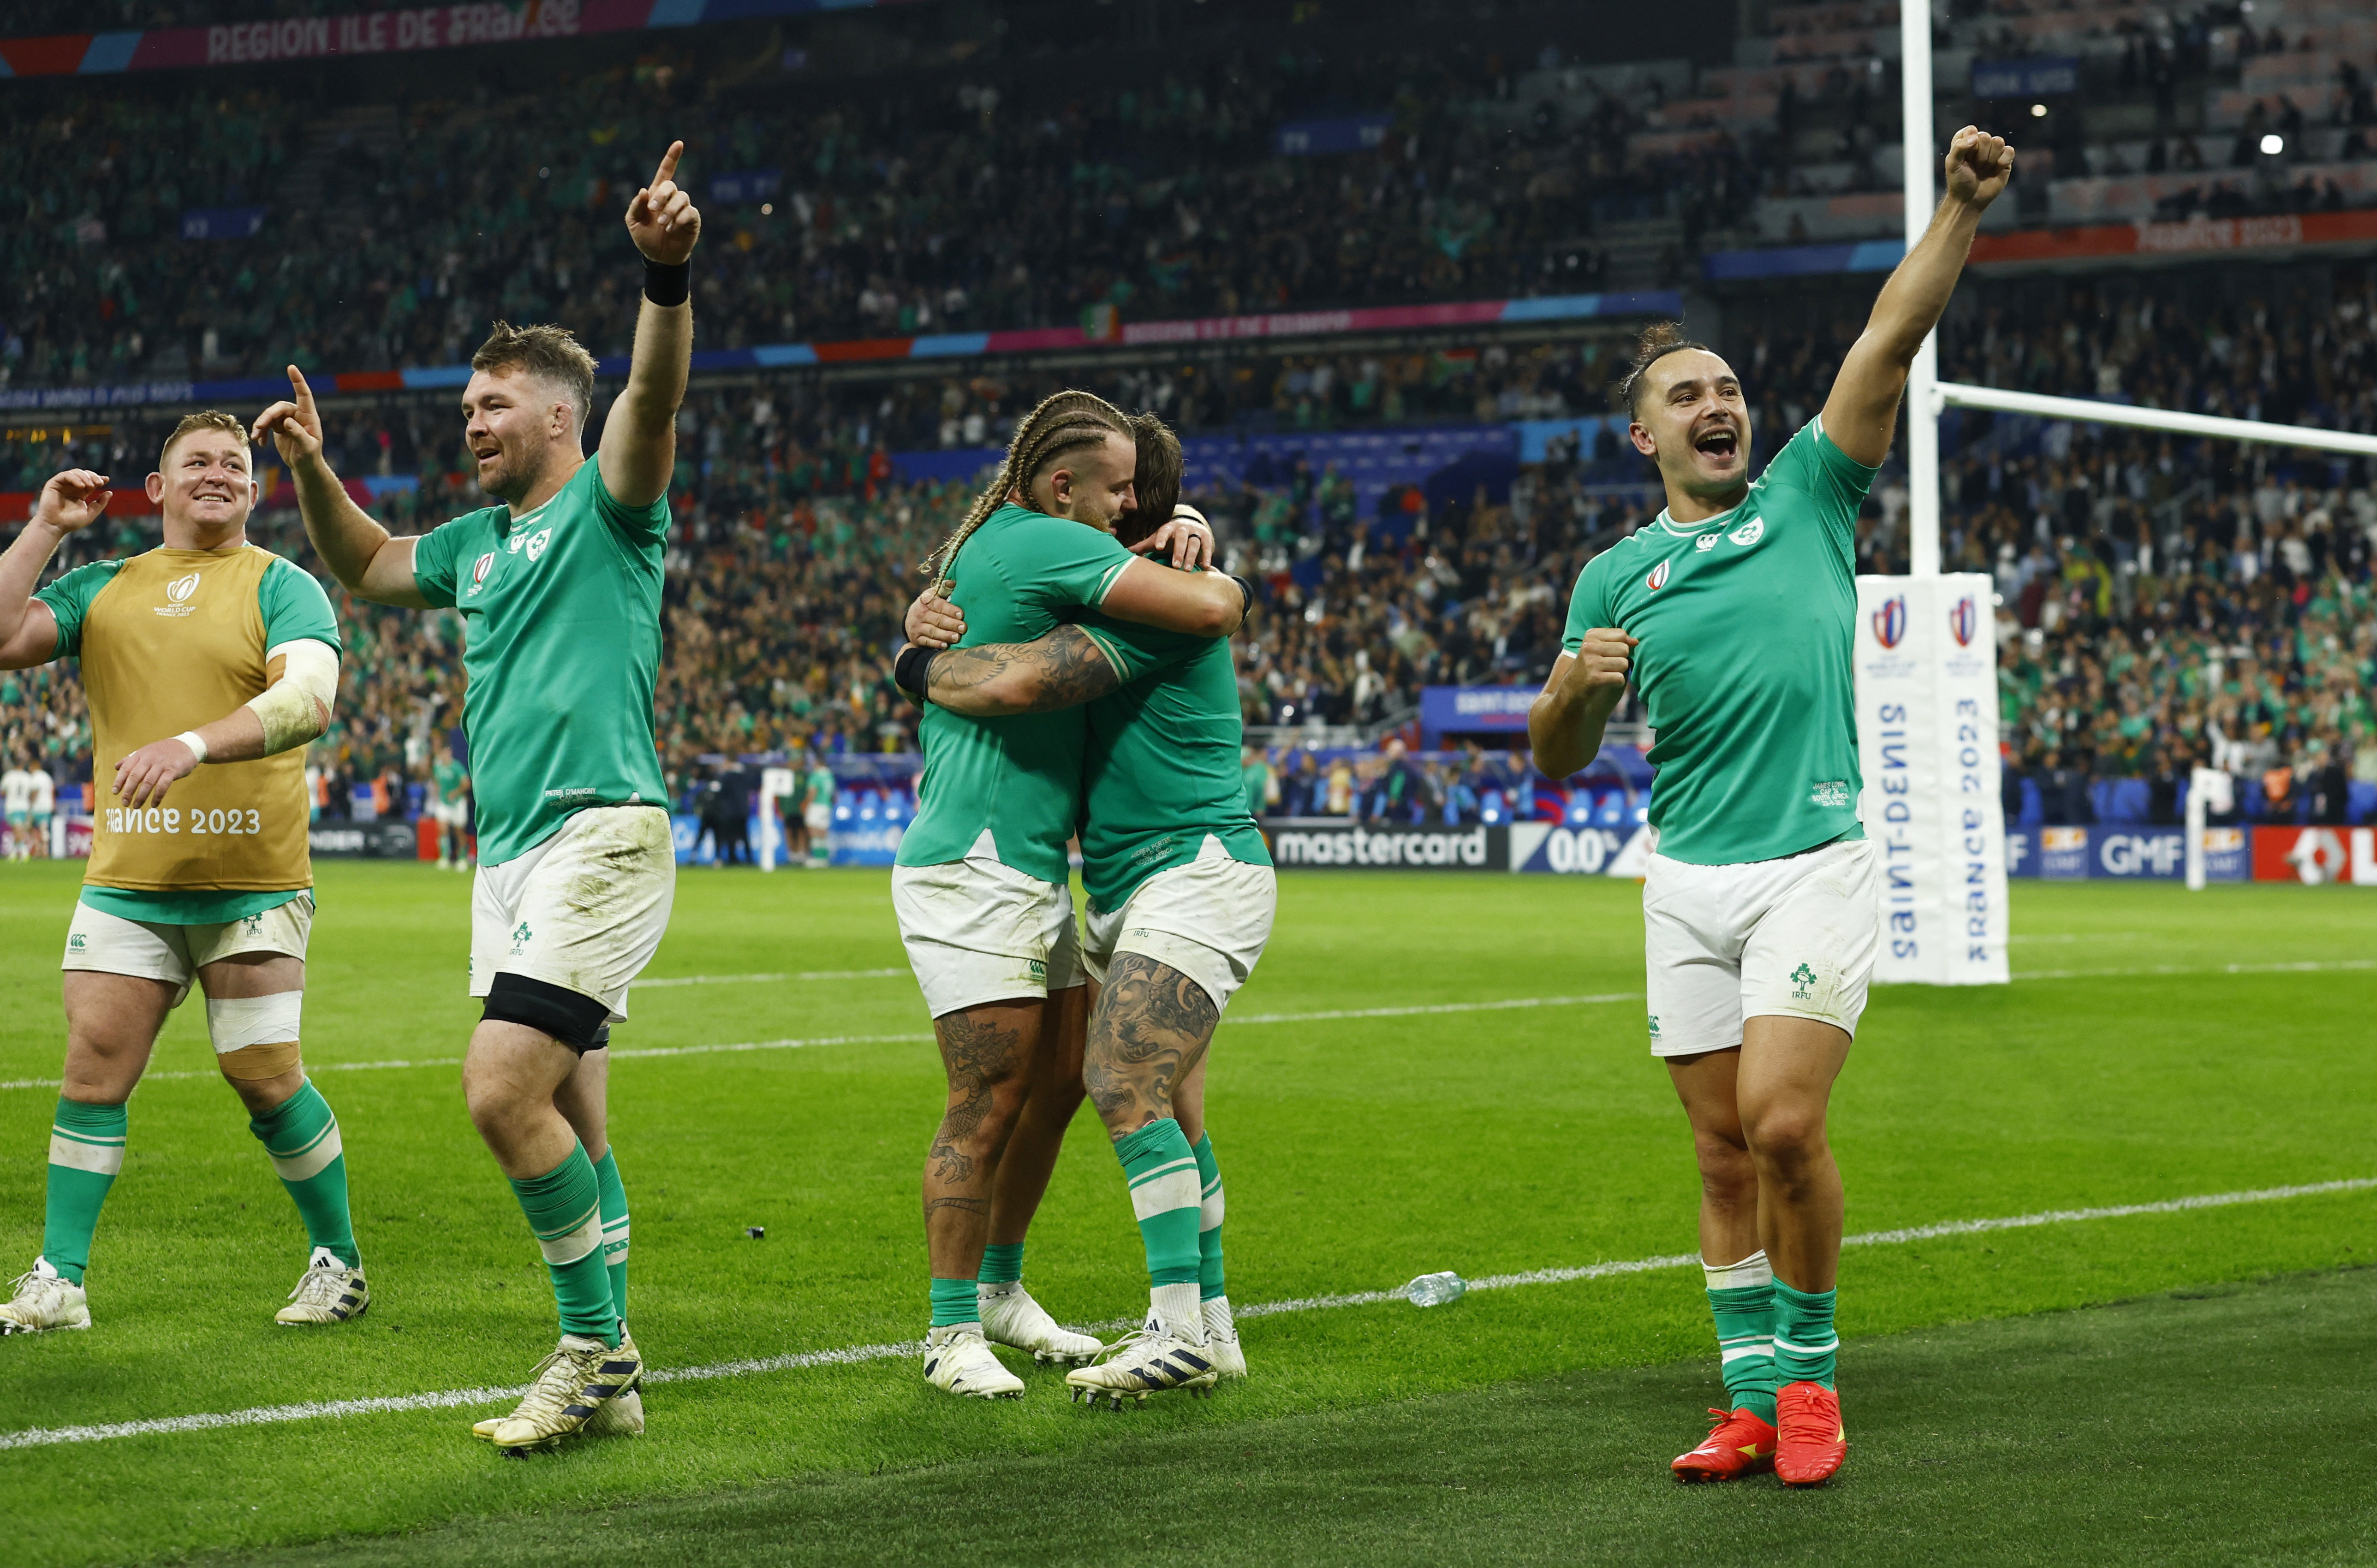 Biggest Irish TV audience of the year tuned in for win over South Africa Reuters